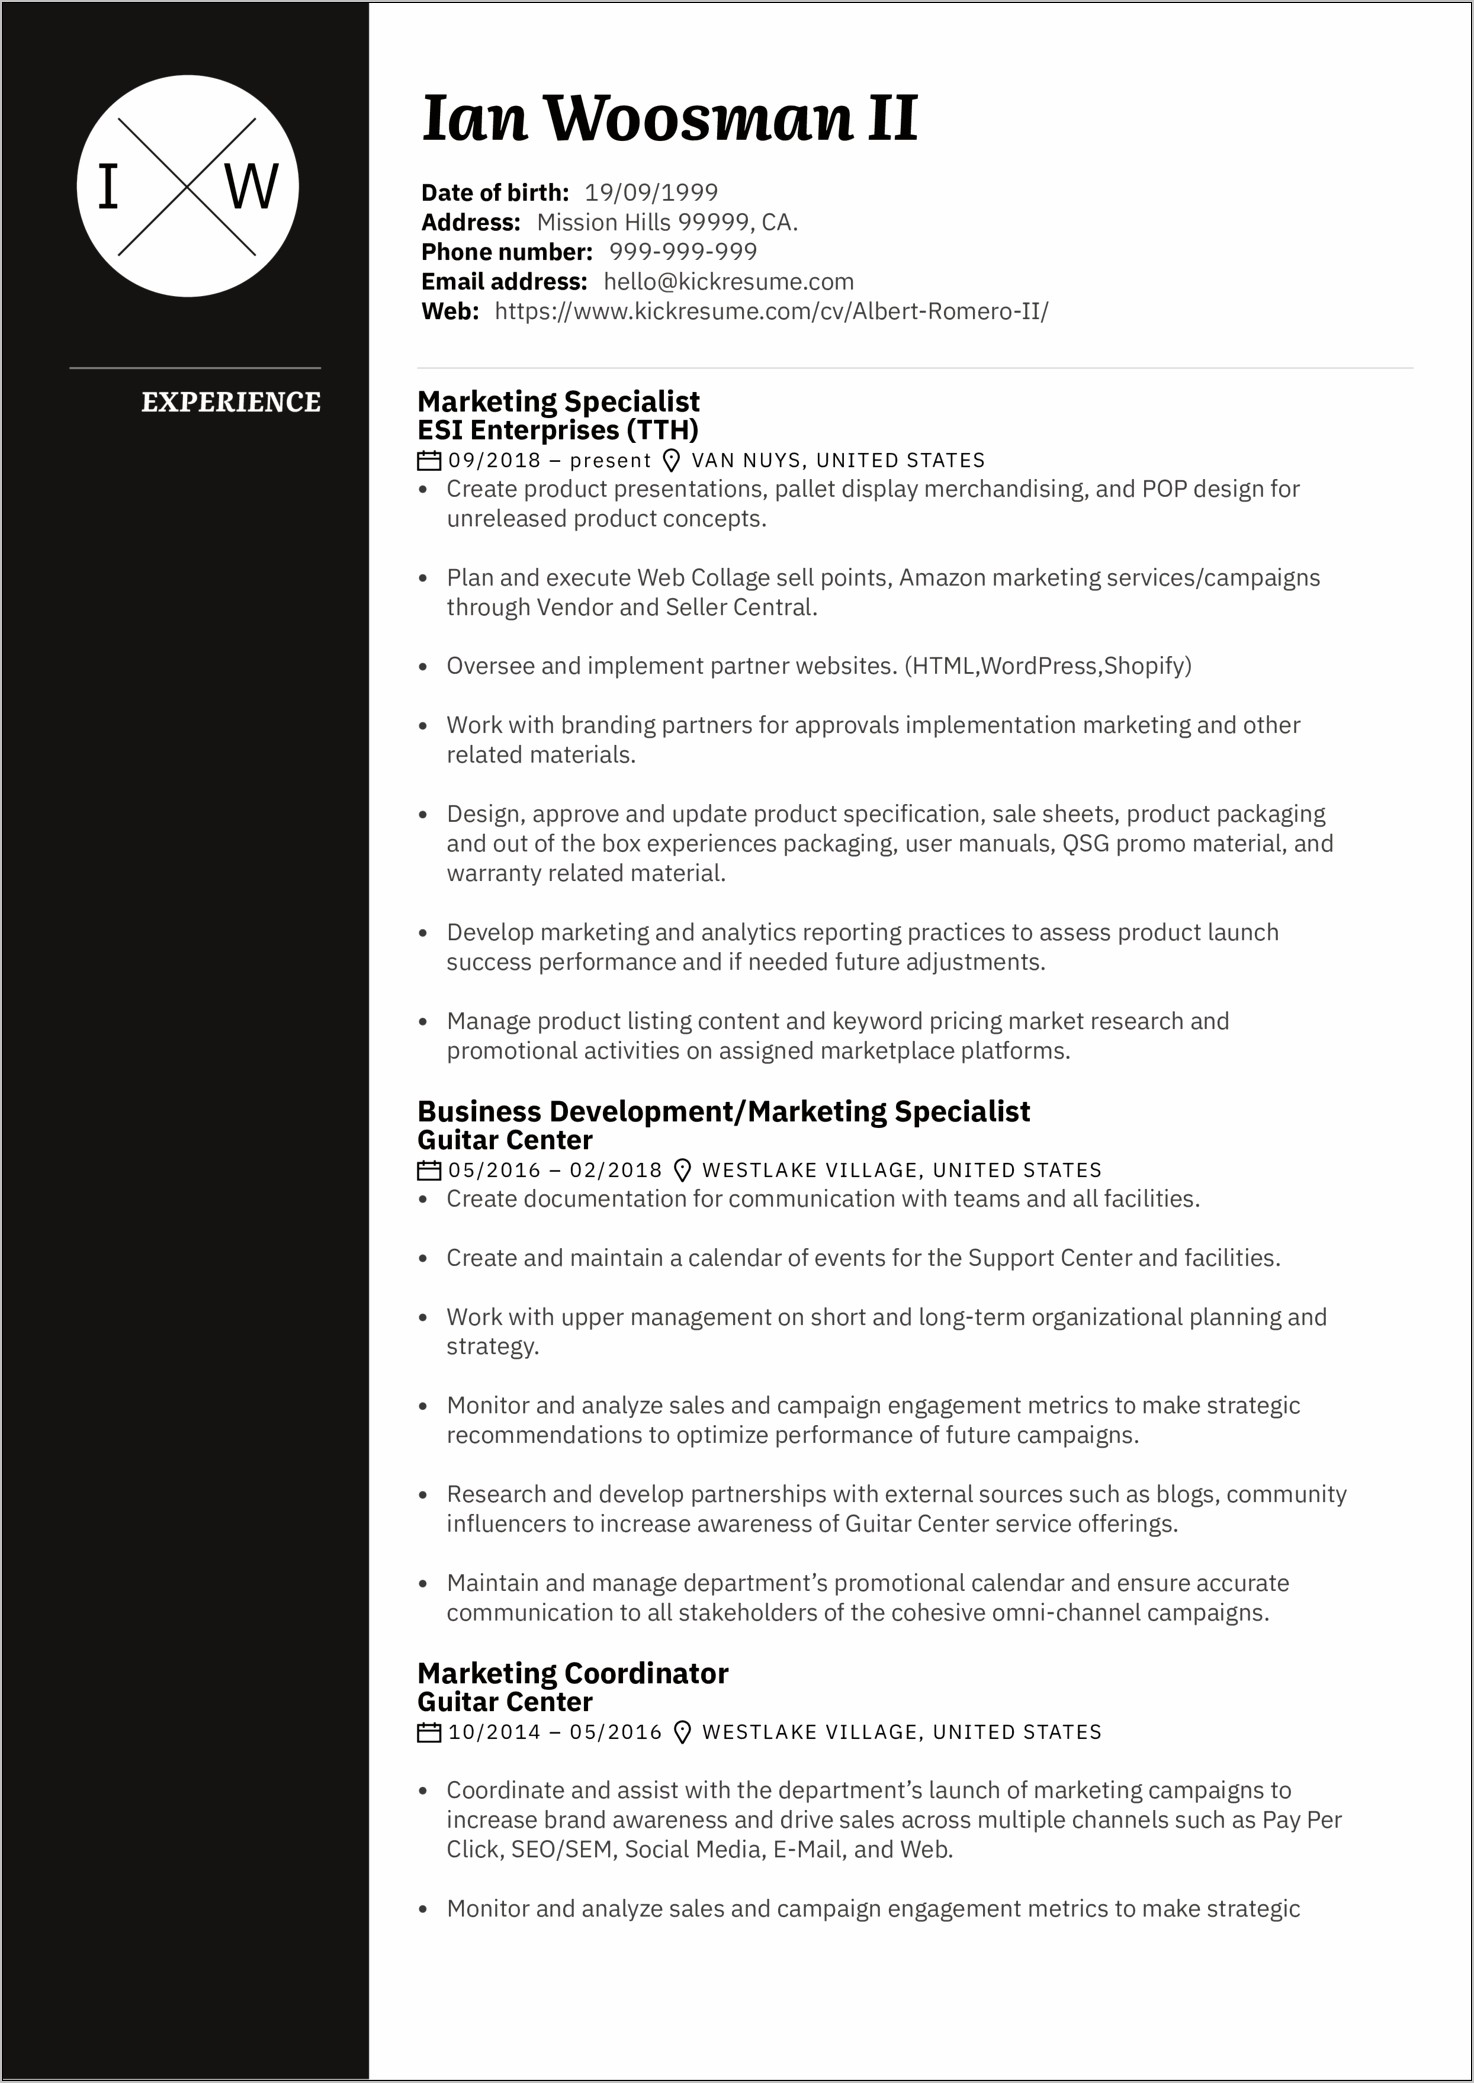 Resume To Obtain A Marketing And Promotions Job